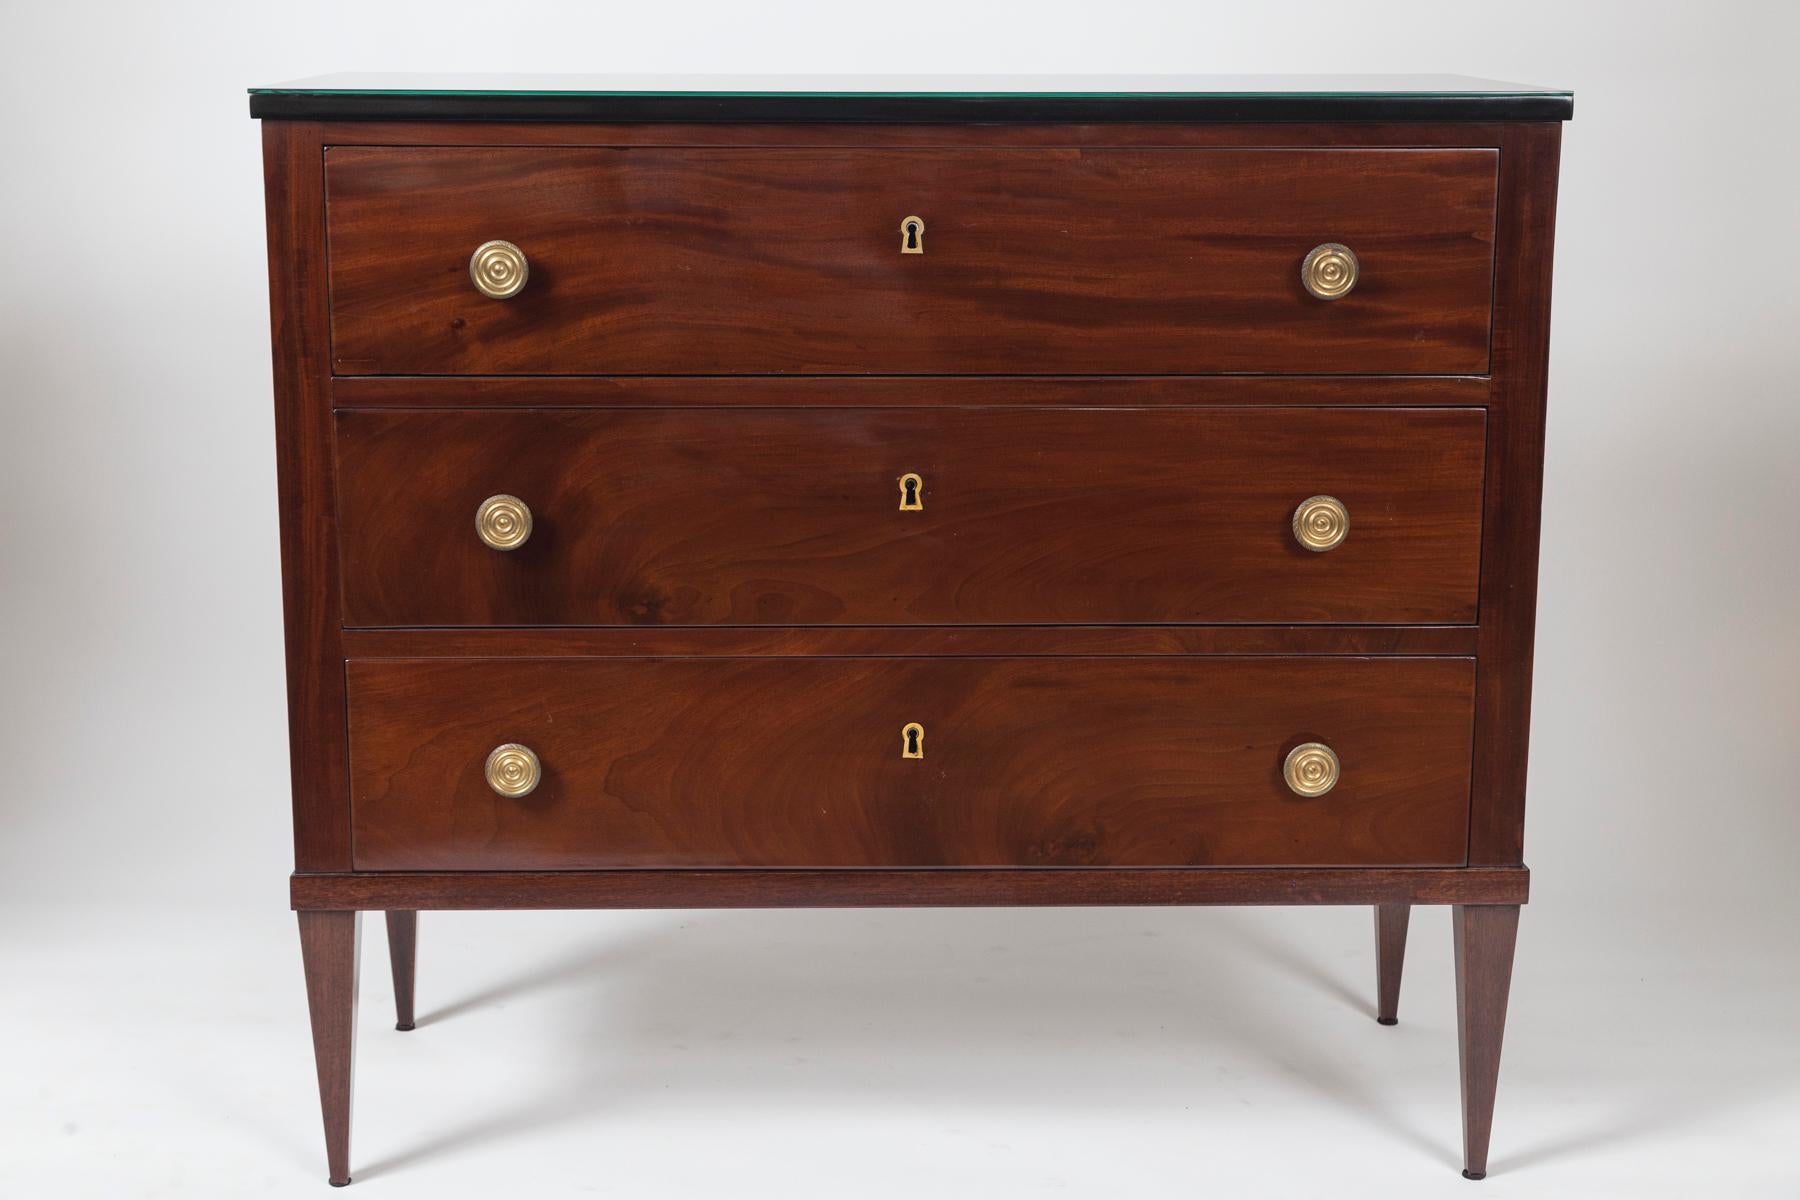 German Sleek Pair of Continental Empire Chests of Drawers For Sale